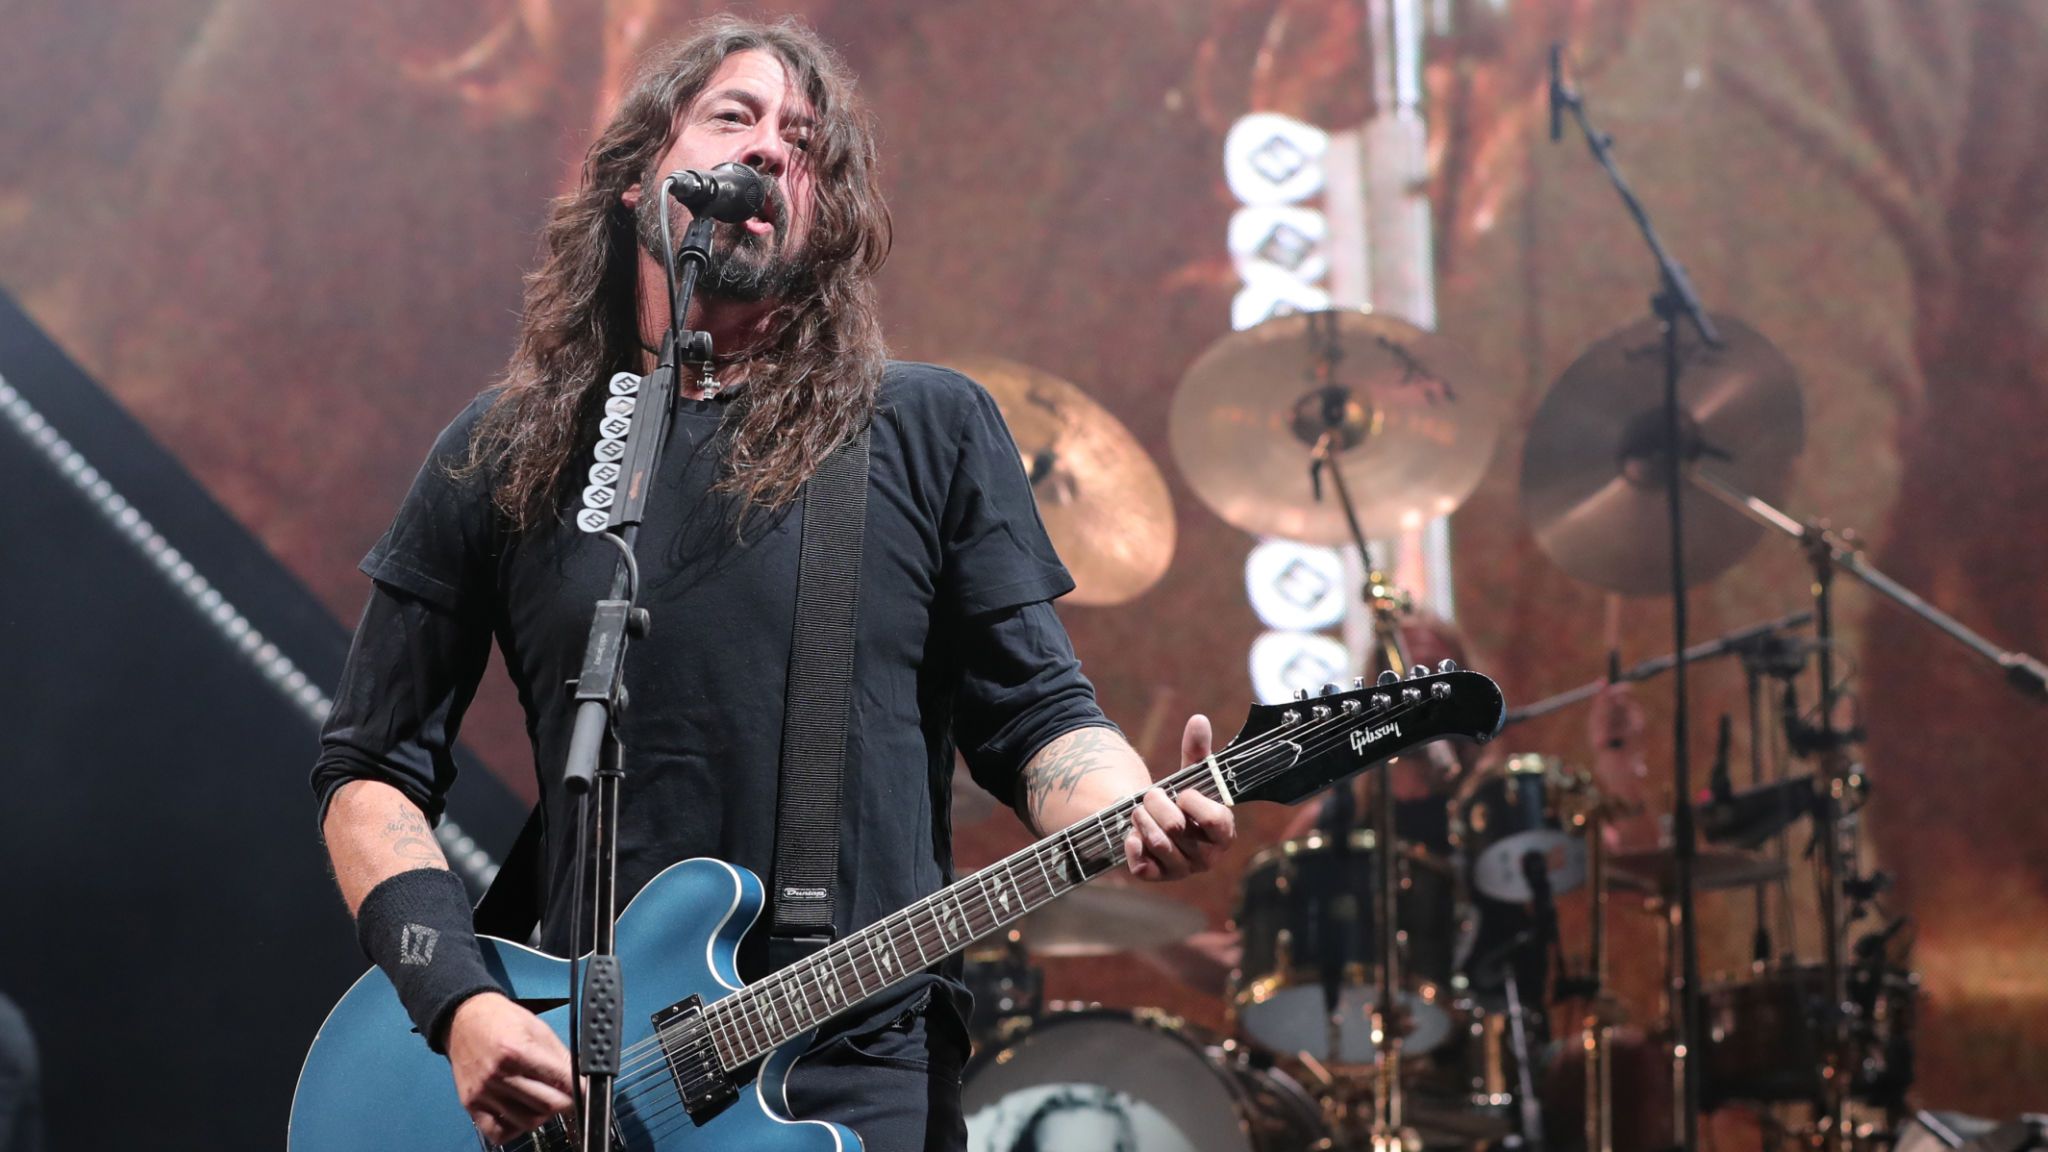 Dave Grohl Of Foo Fighters Performs On Stage During Rock Concert